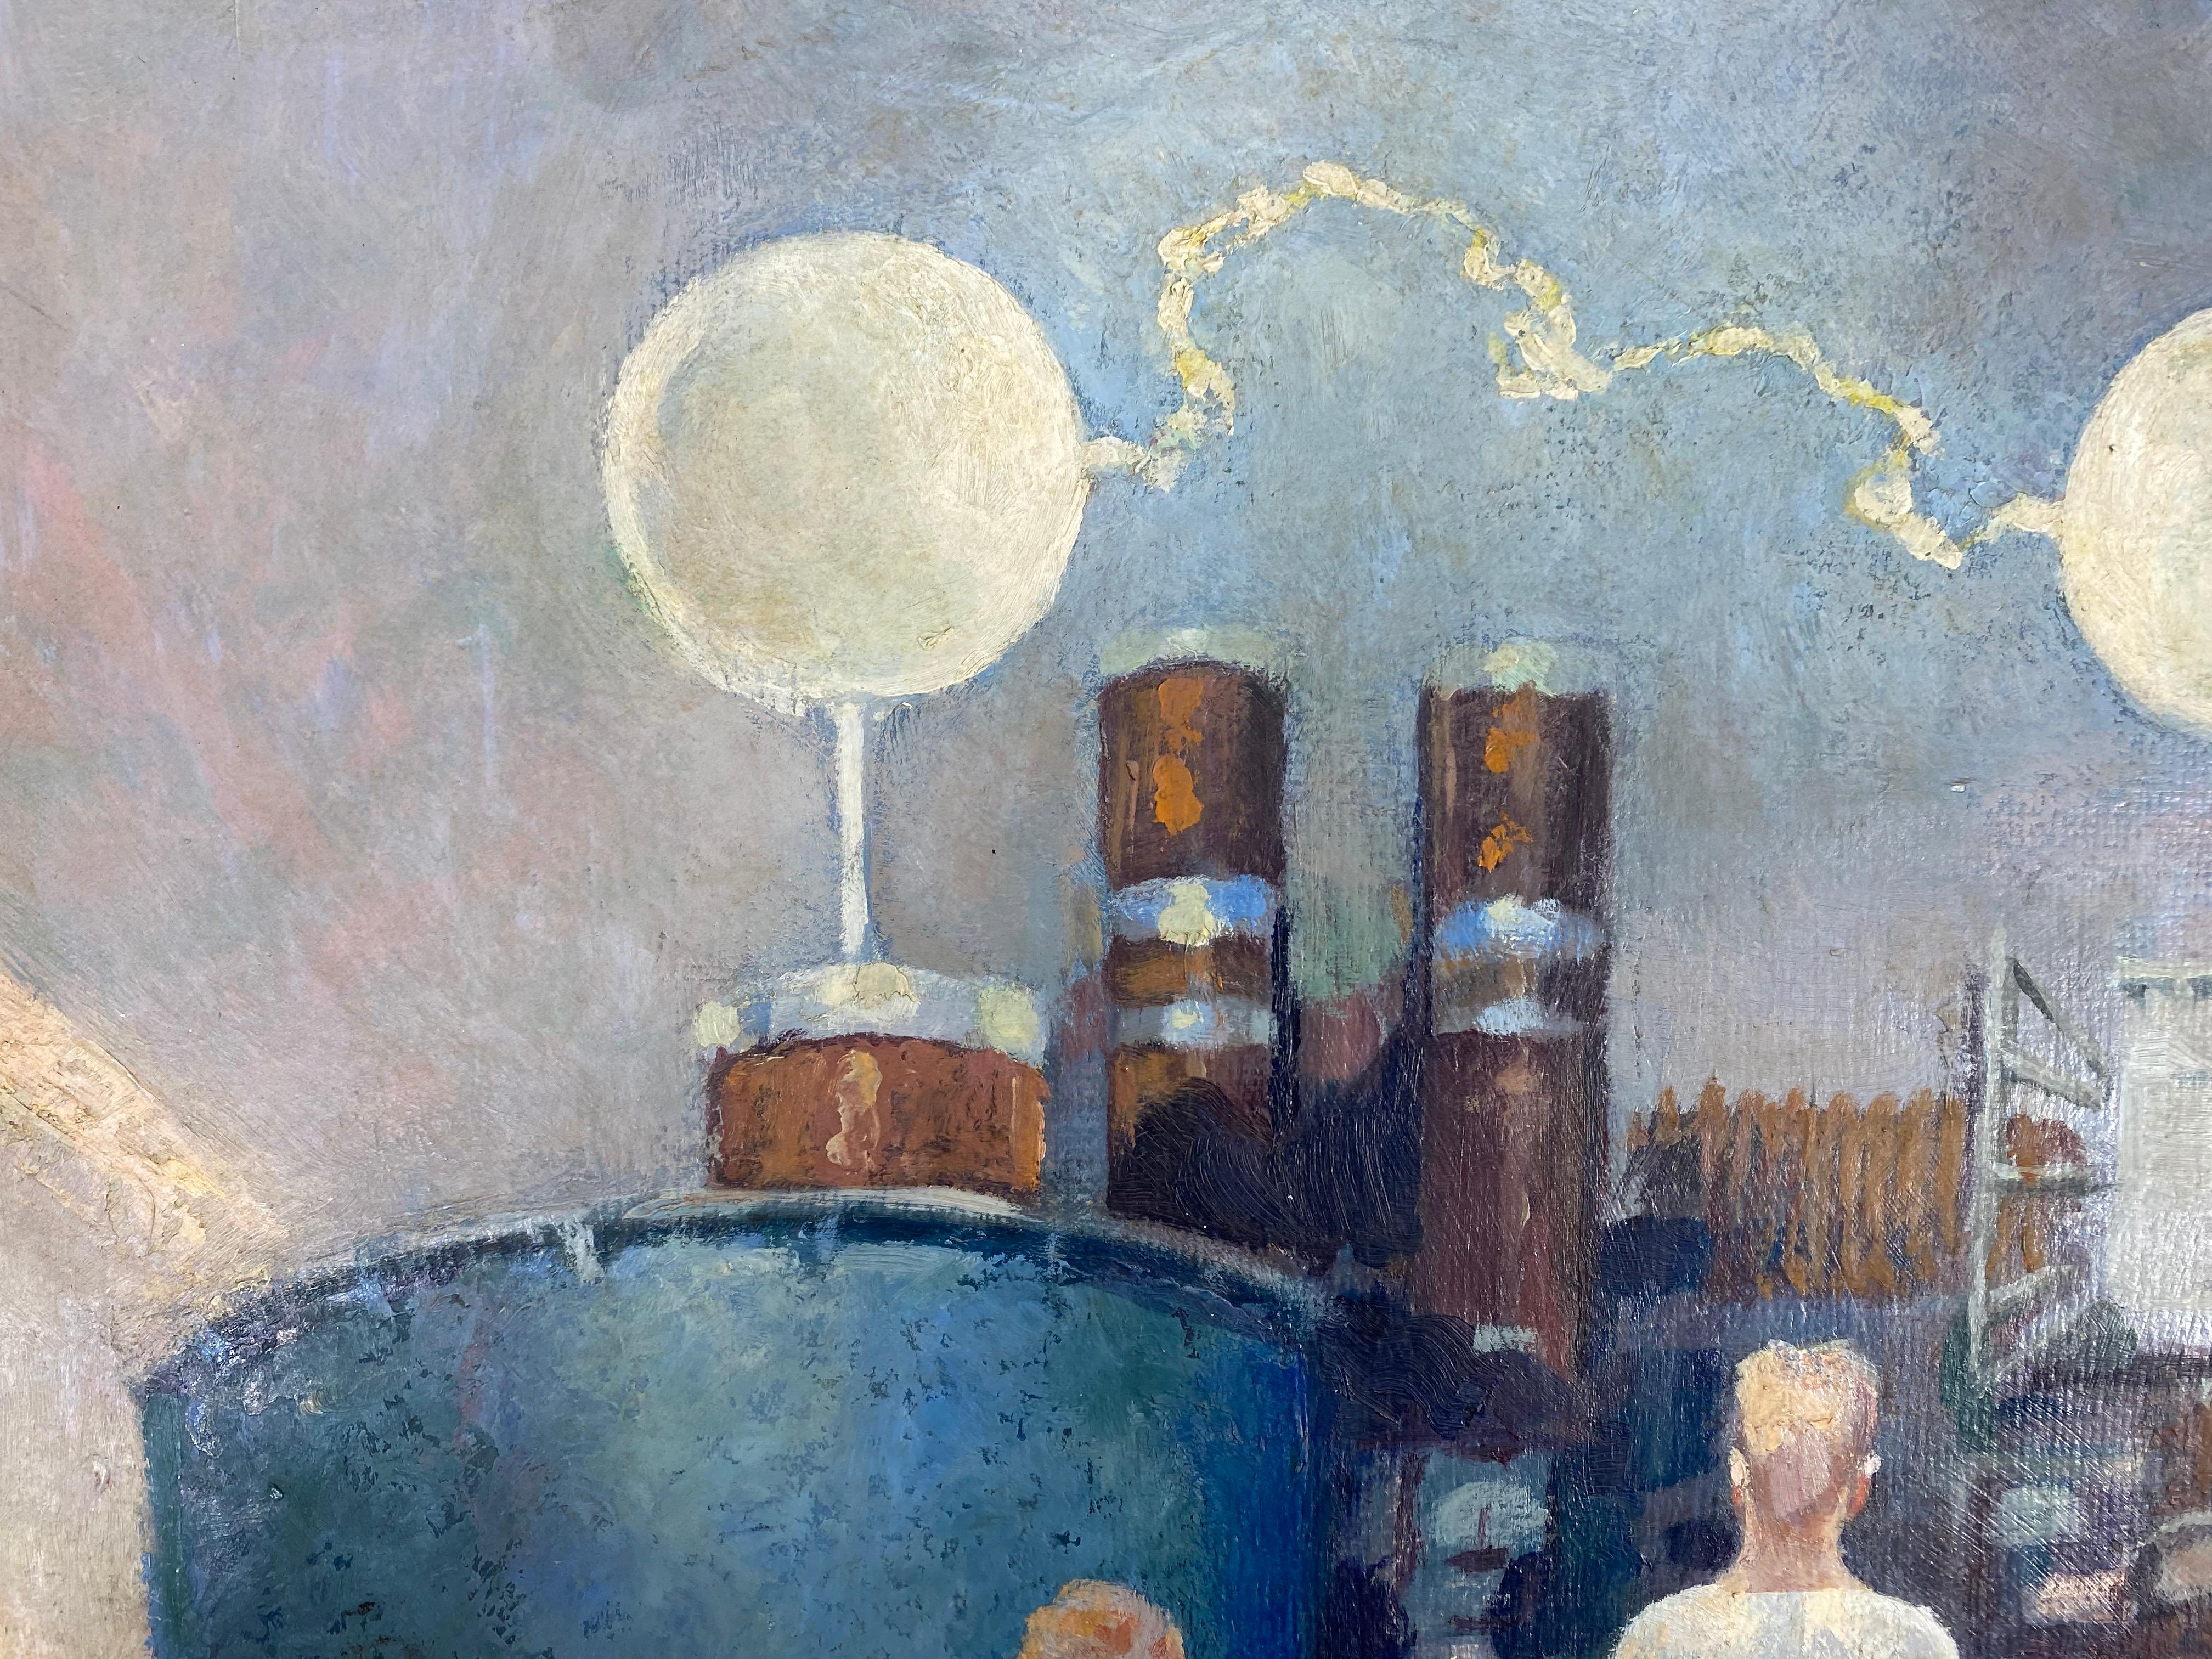 Mid-20th Century W.P.A. Style Painting, Science, Politics Industry 1940s-1950s, Oil on Board